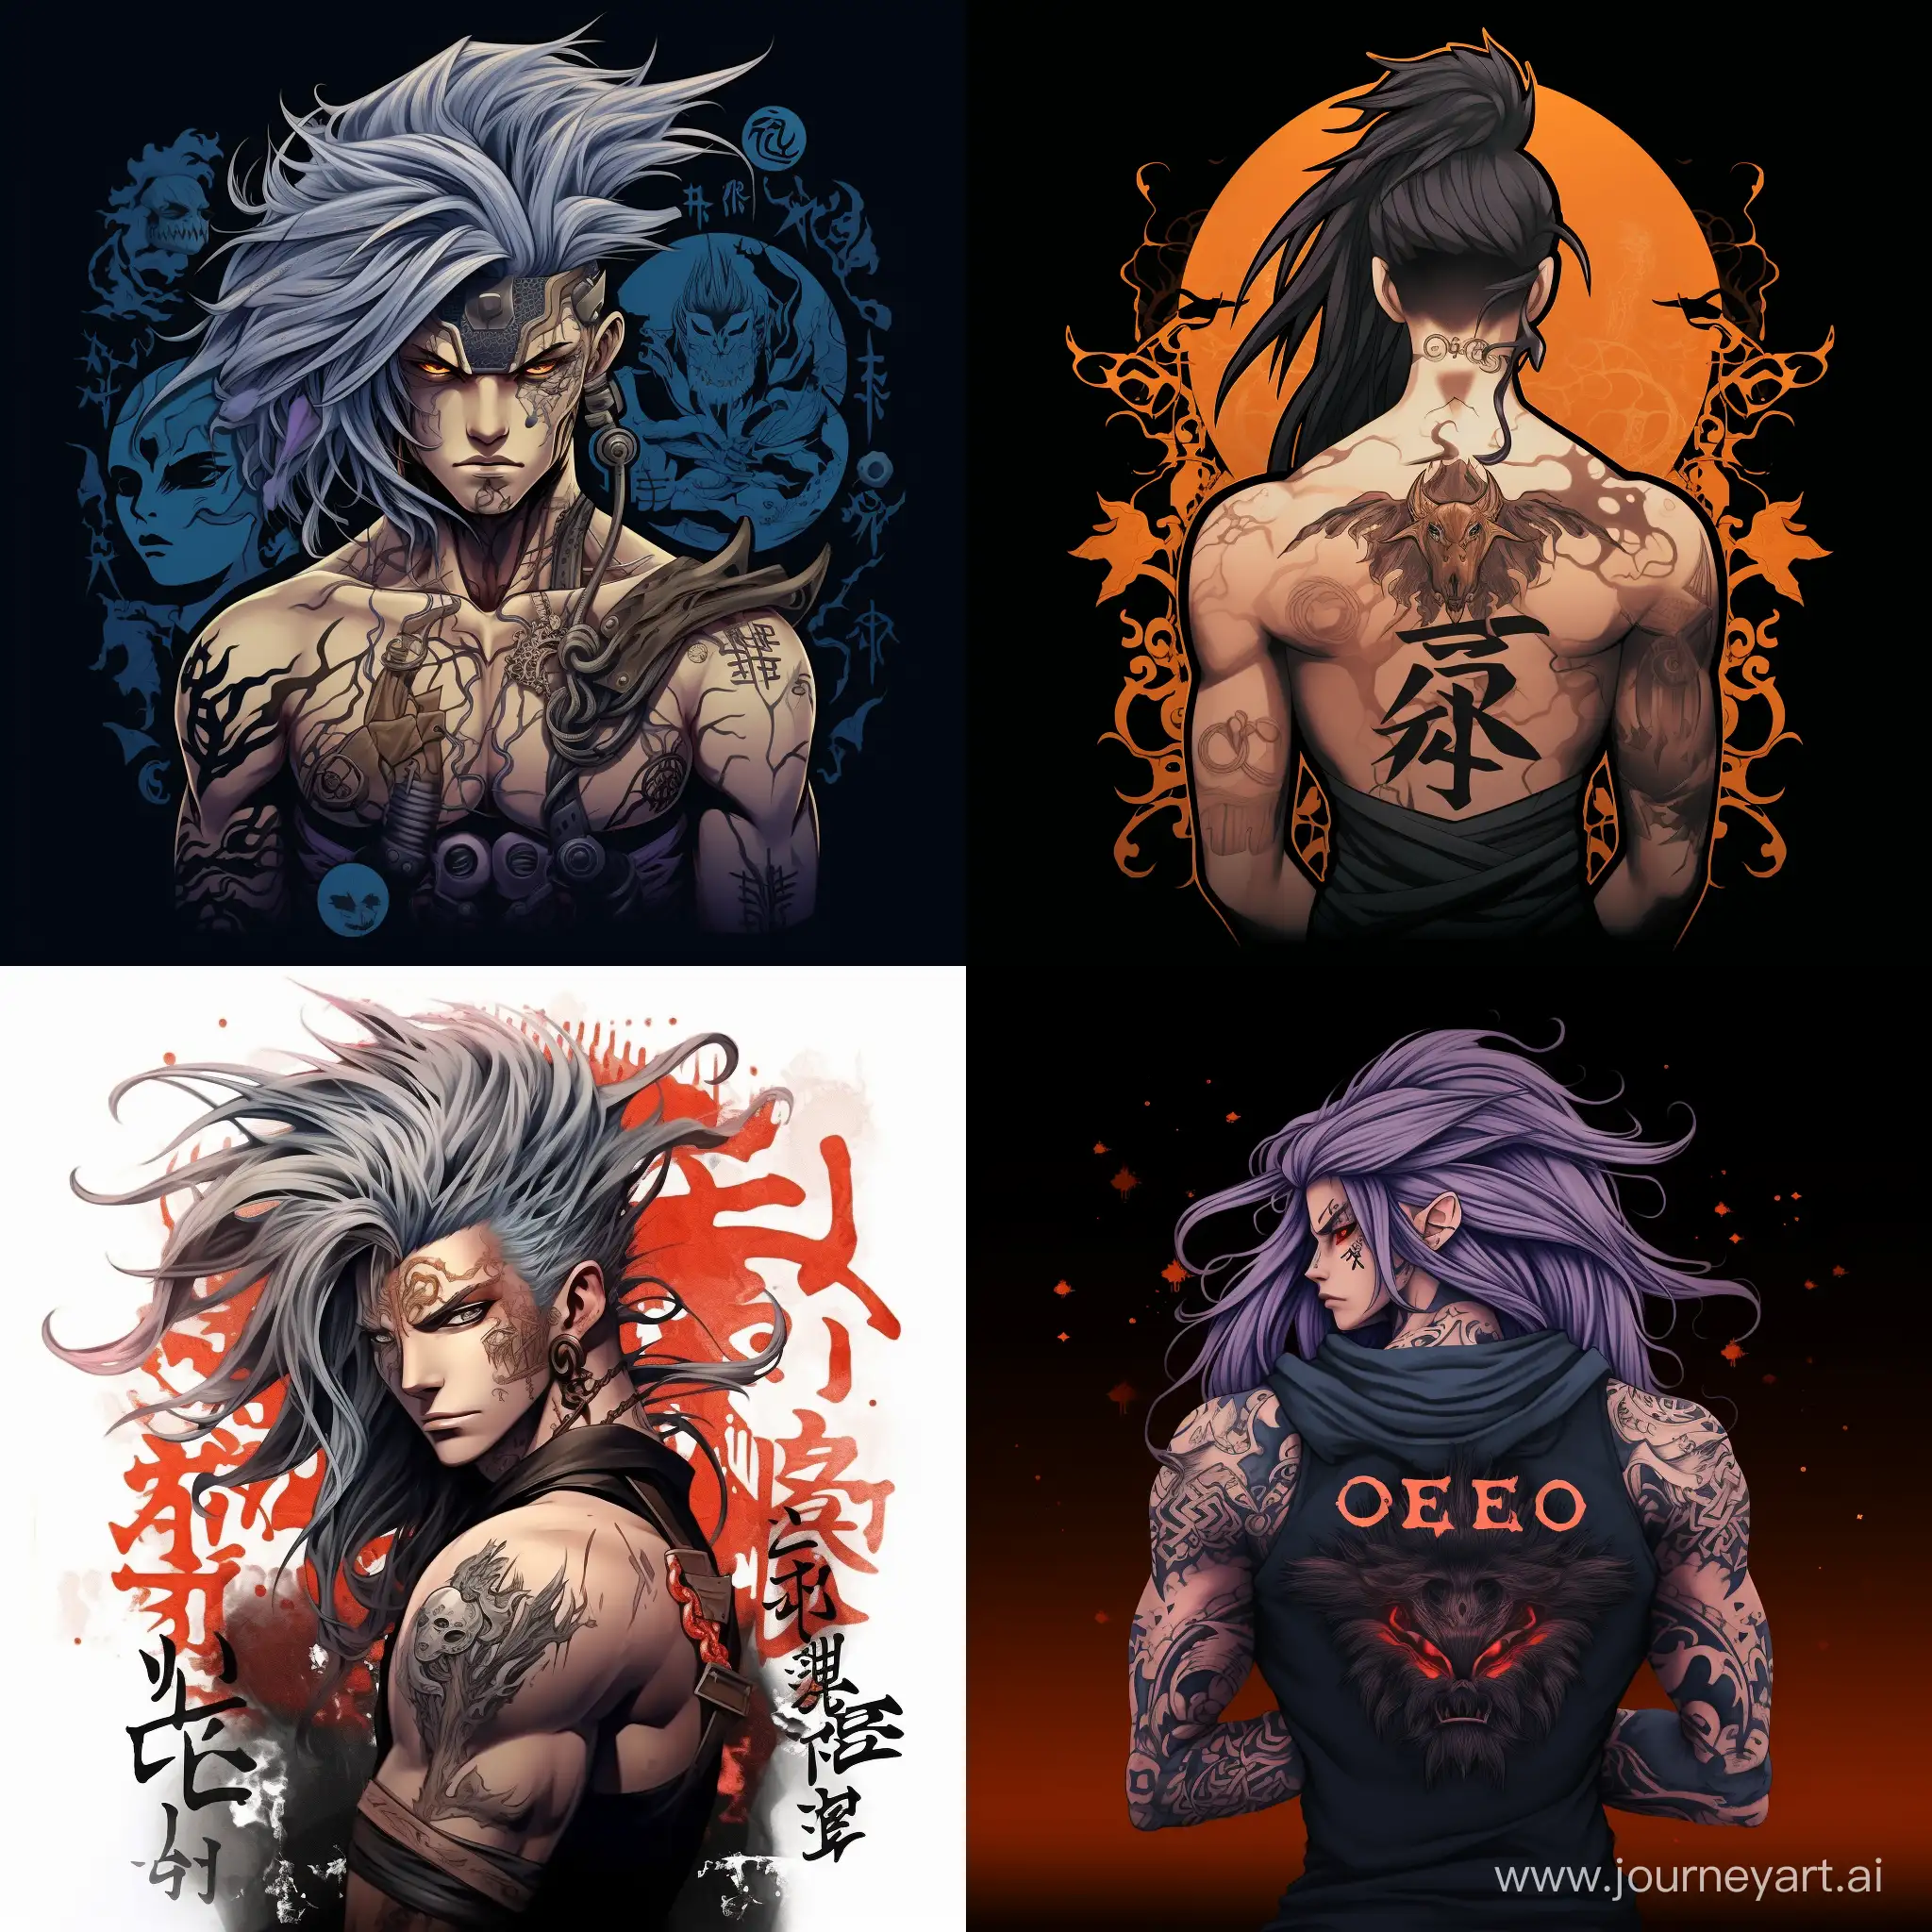 Muscular-Anime-Character-Nefor-Omega-with-Striking-Tattoos